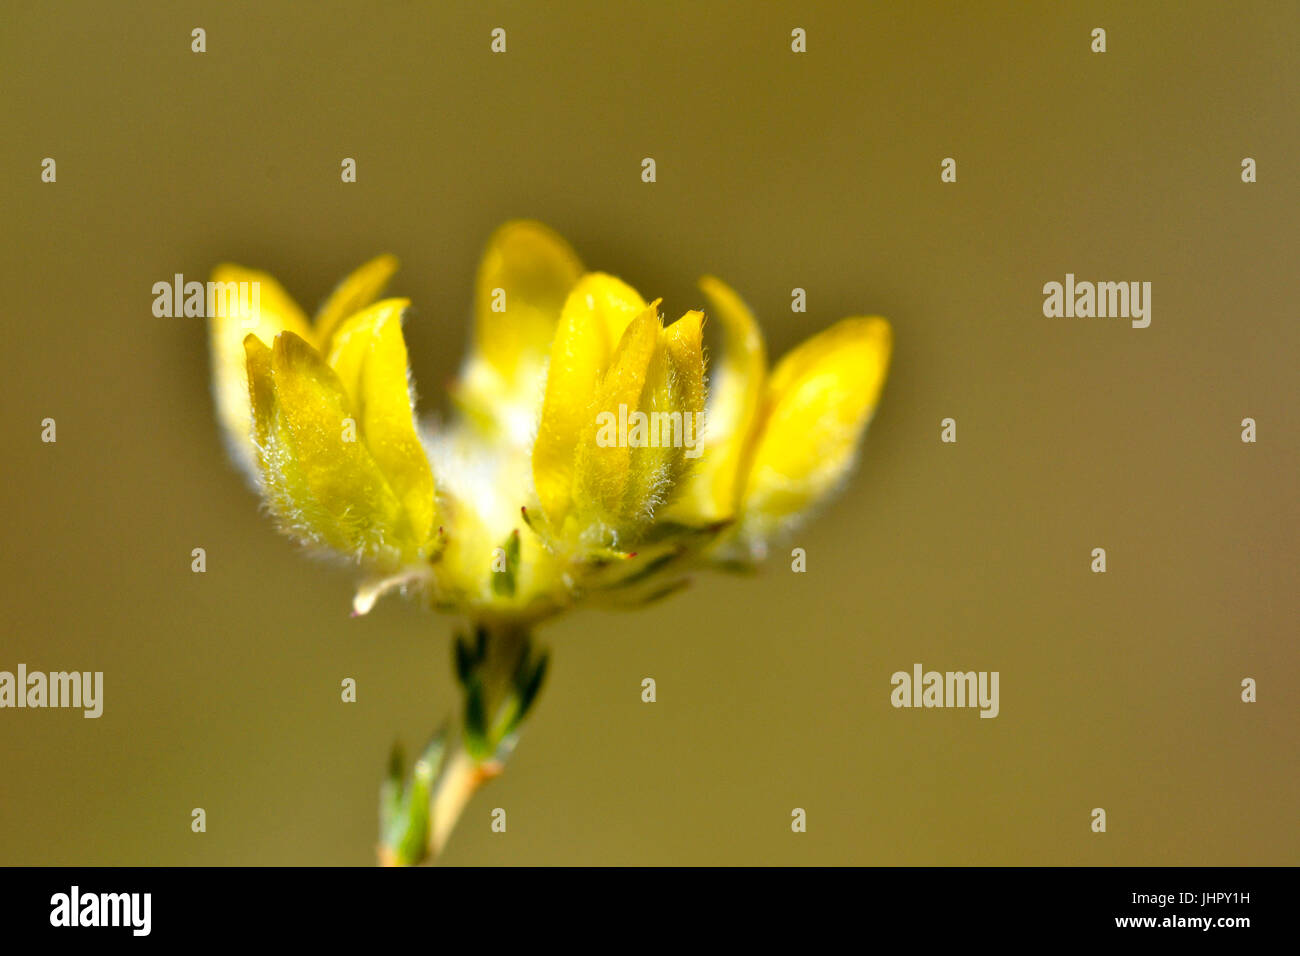 Yellow legume flowers in a ring Stock Photo